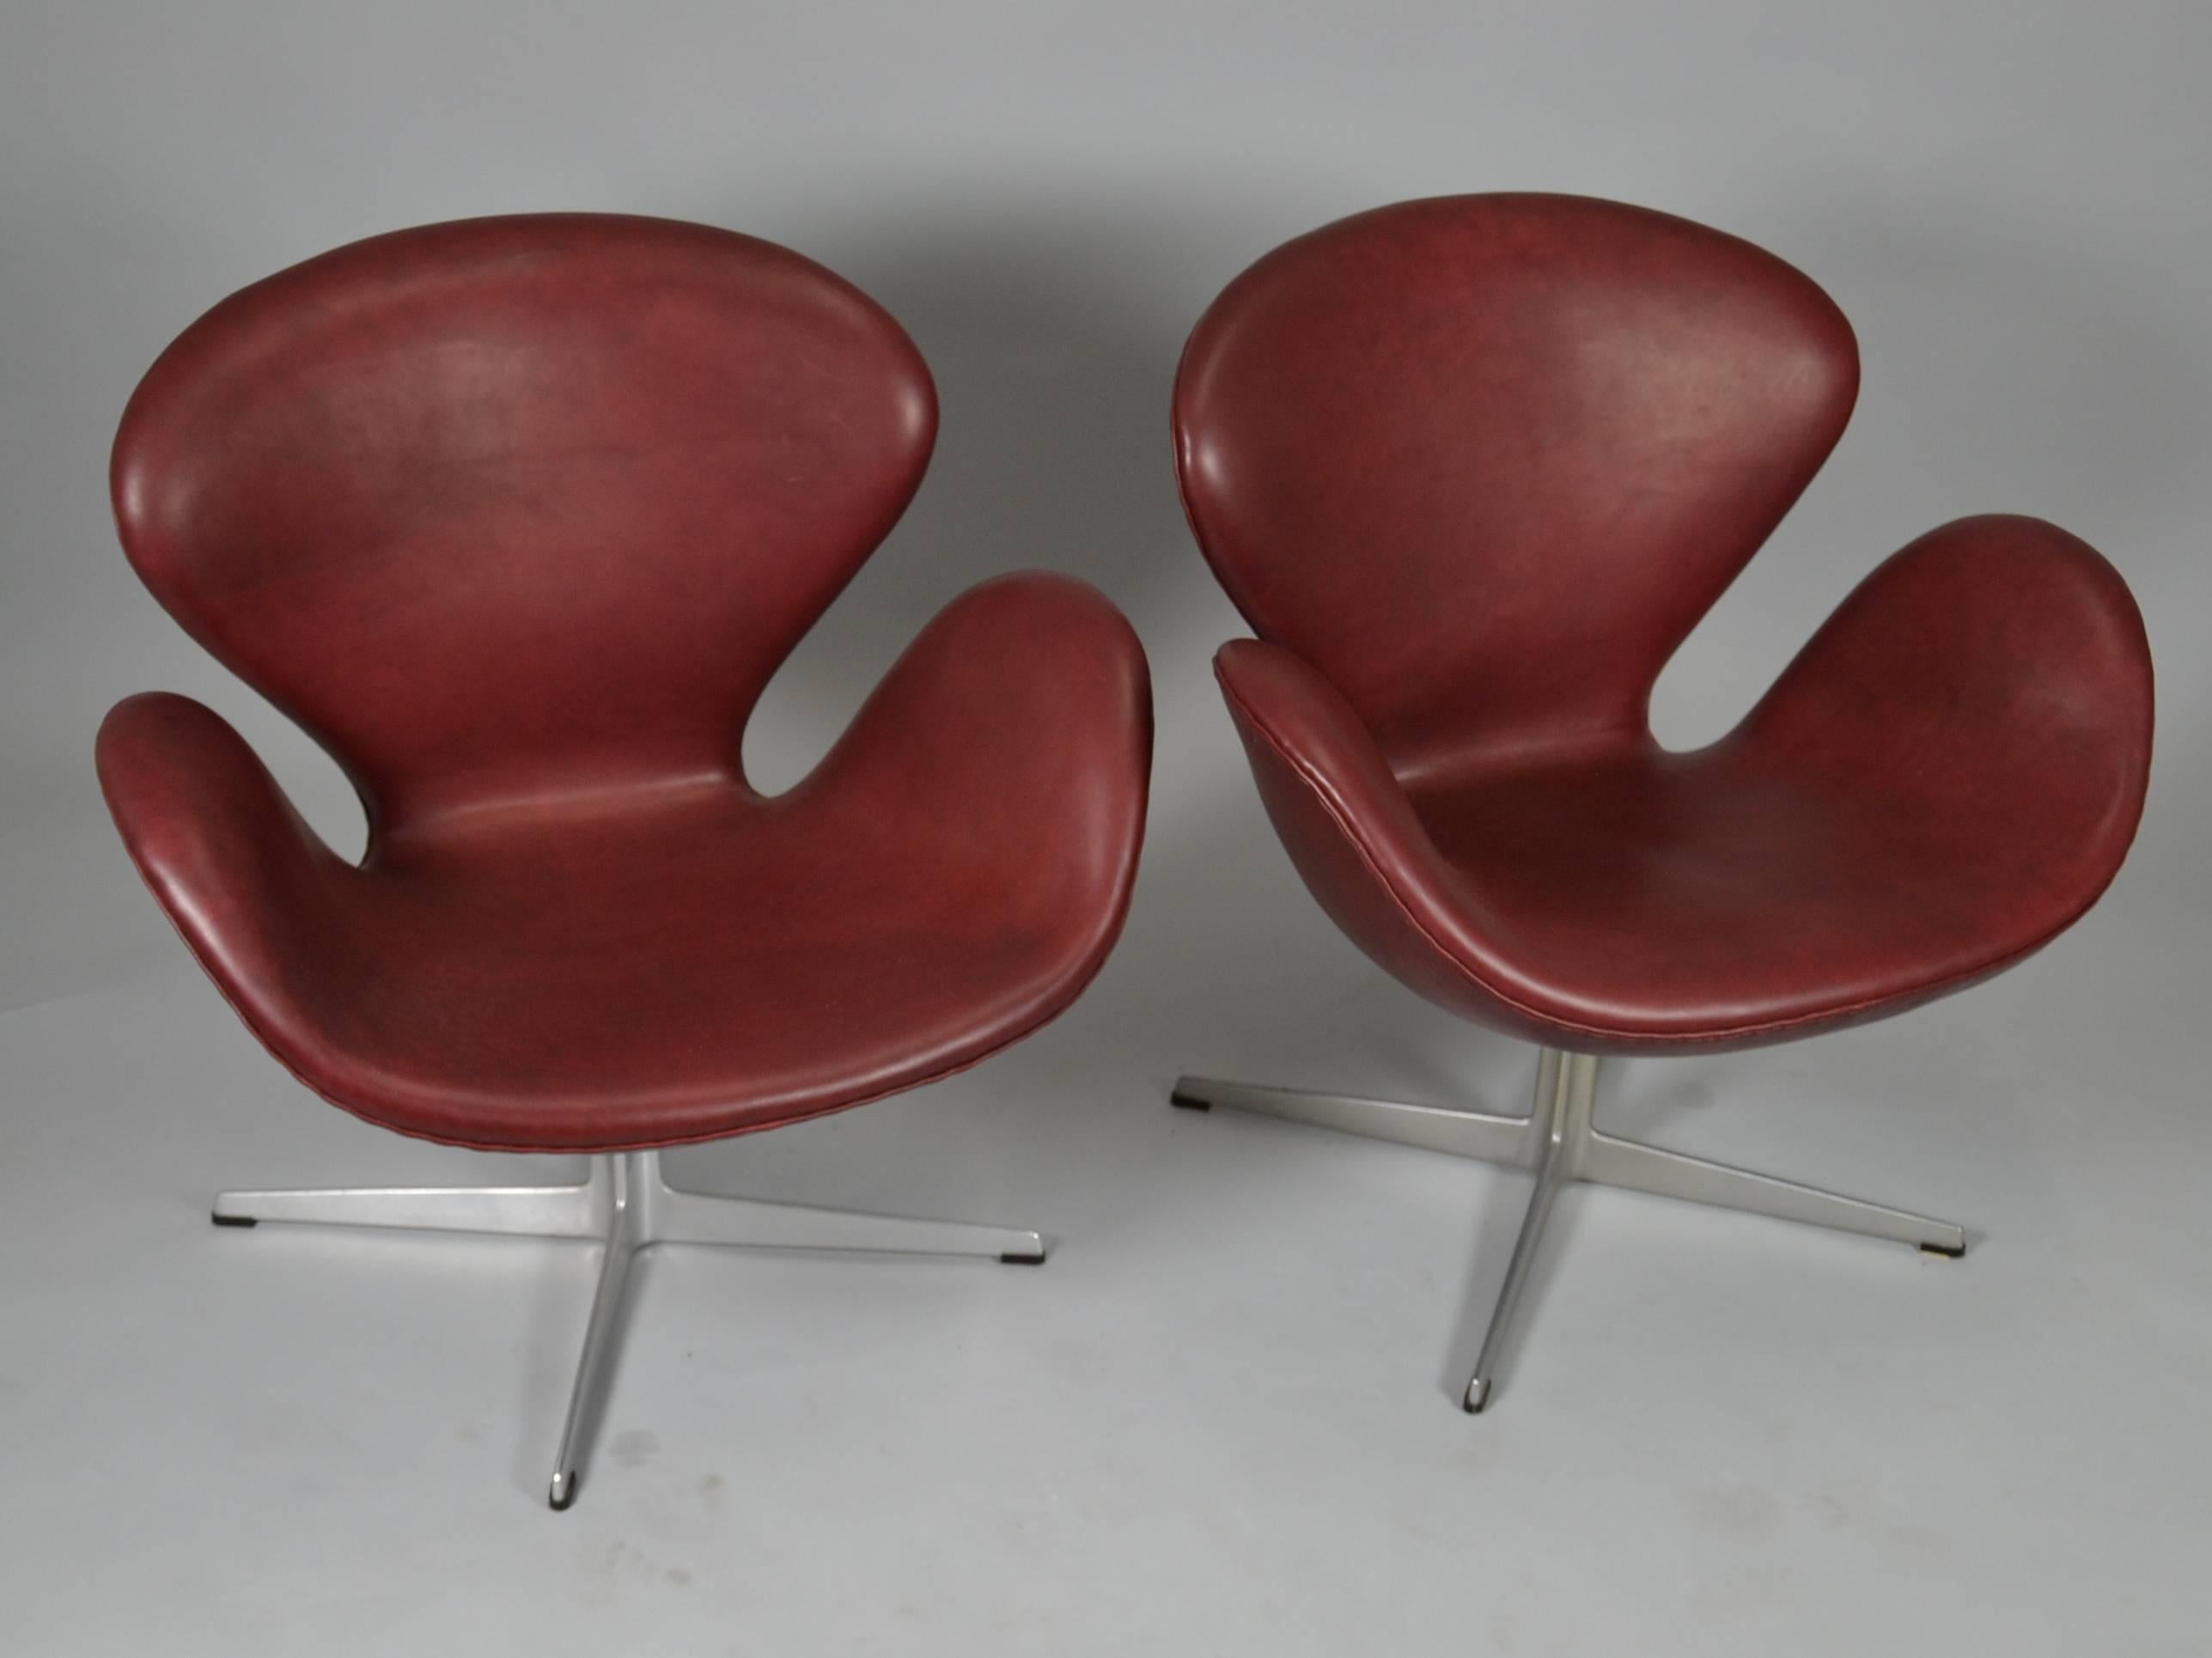 Designed by Arne Jacobsen in 1958, produced by Fritz Hansen before 1975.
Swivel chairs with an Aluminium base, shell upholstery is new in bordeaux aniline leather.
 